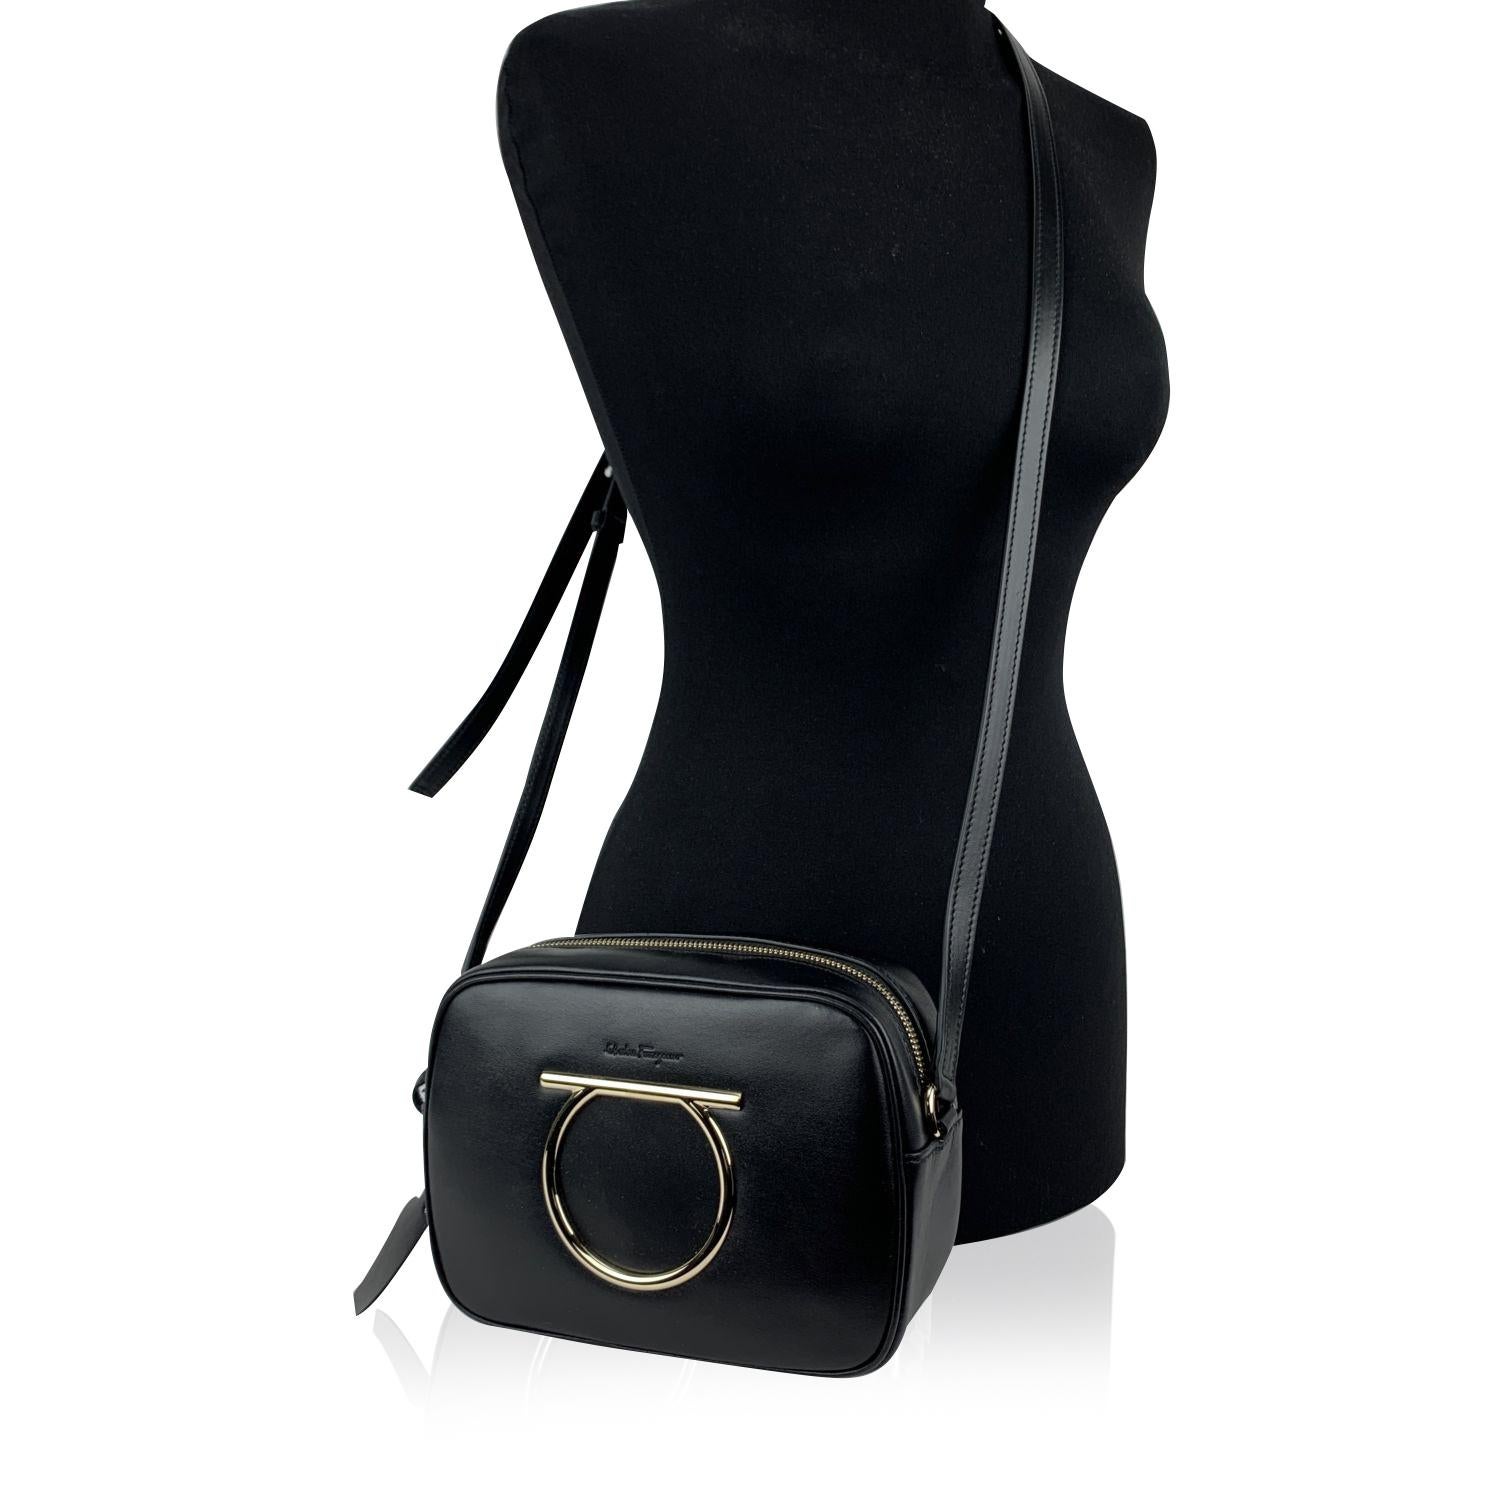 Beautiful 'Vela CC' shoulder bag by Salvatore Ferragamo. Made of black calf leather. It features the Gancino logo detailing on the front in gold metal. Upper zipper closure. Adjustable leather shoulder strap. Canvas lining. 2 side open pockets